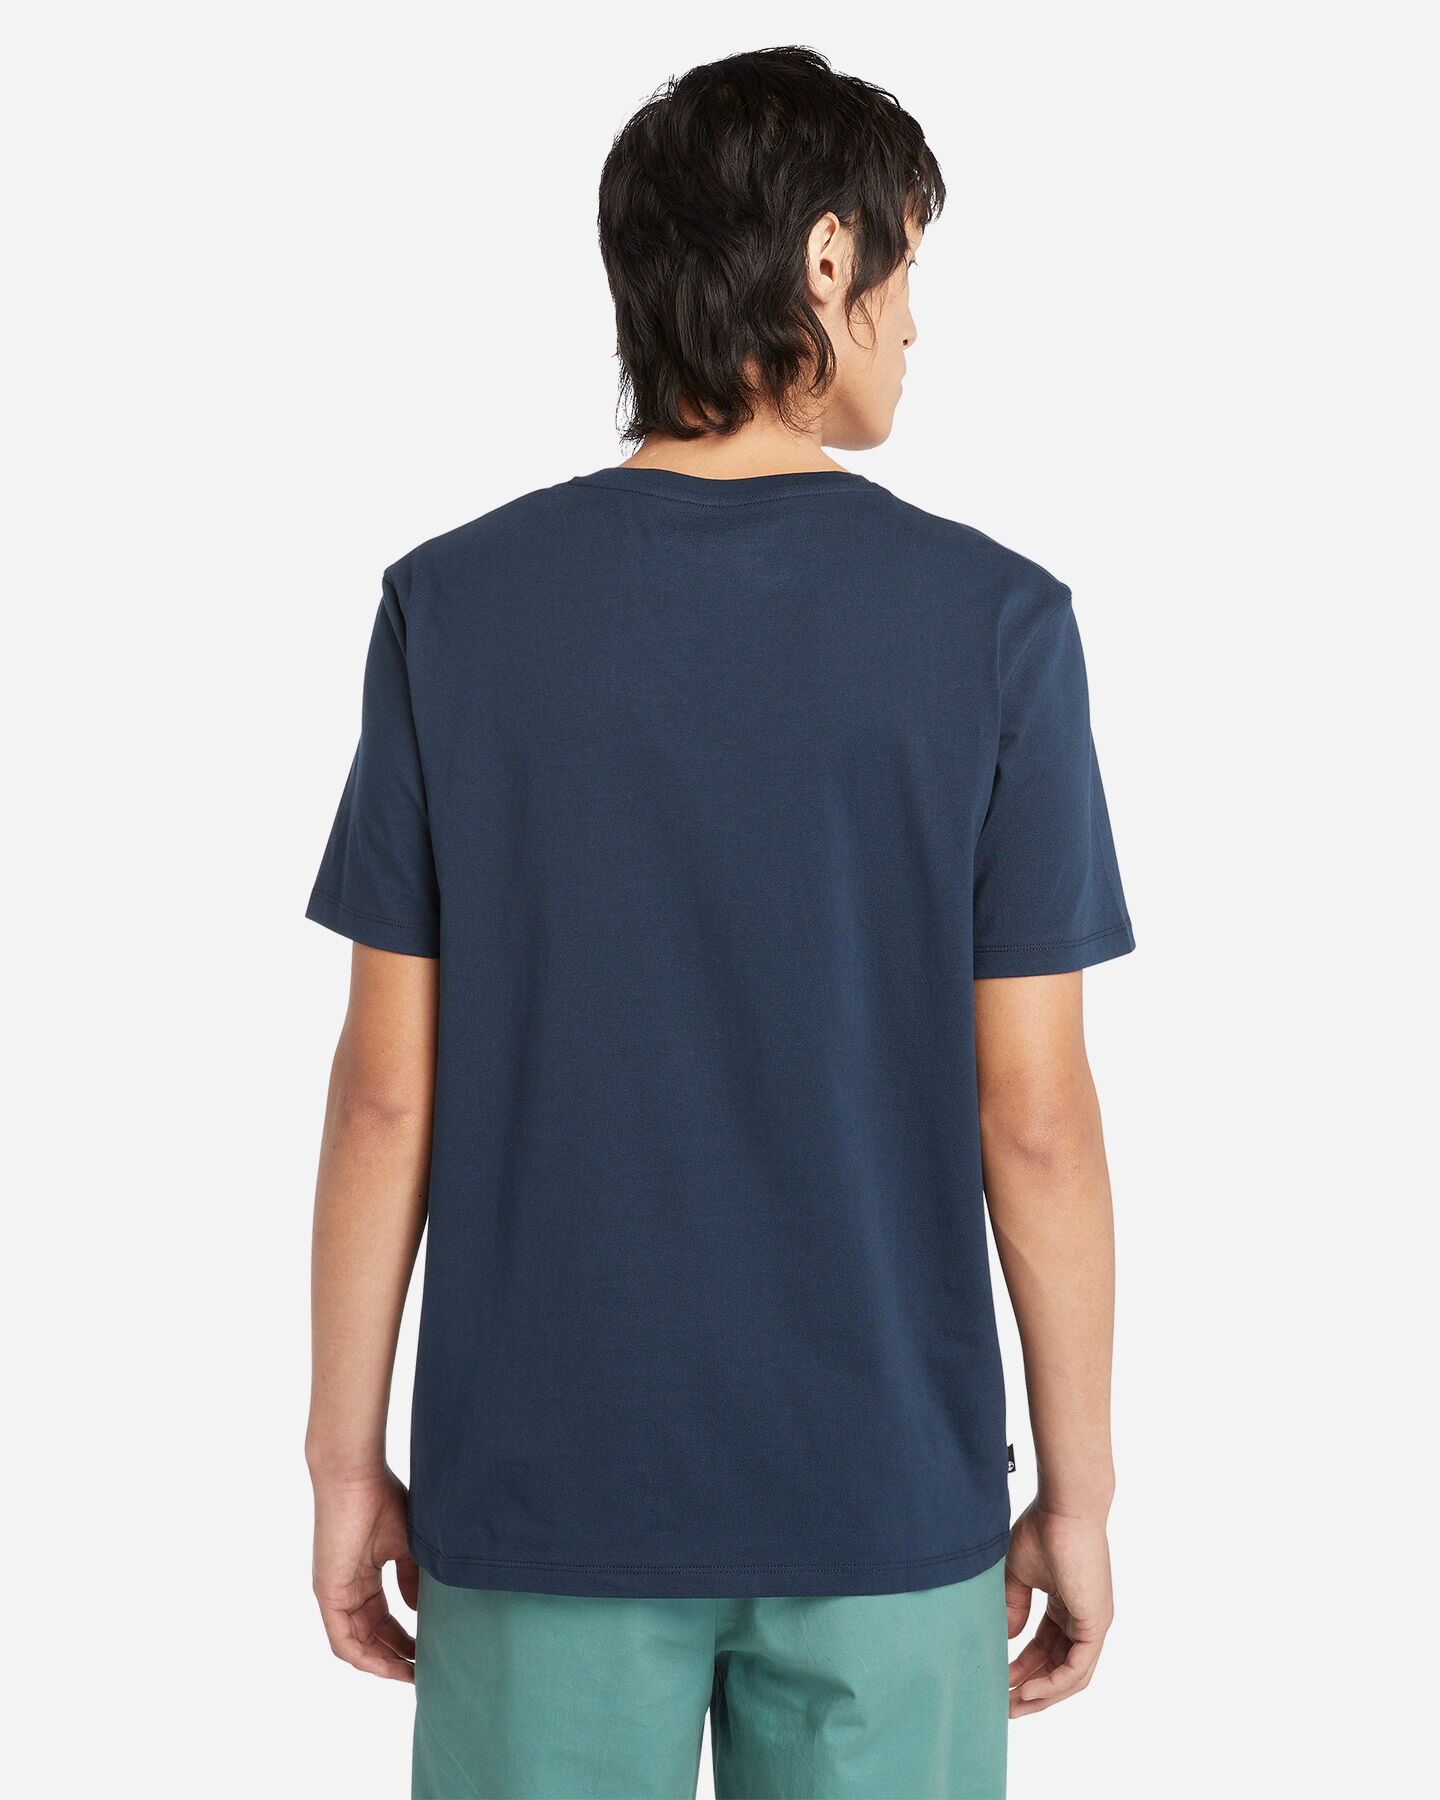  T-Shirt TIMBERLAND MC KENNEBEC M S4131486|Z021|S scatto 2